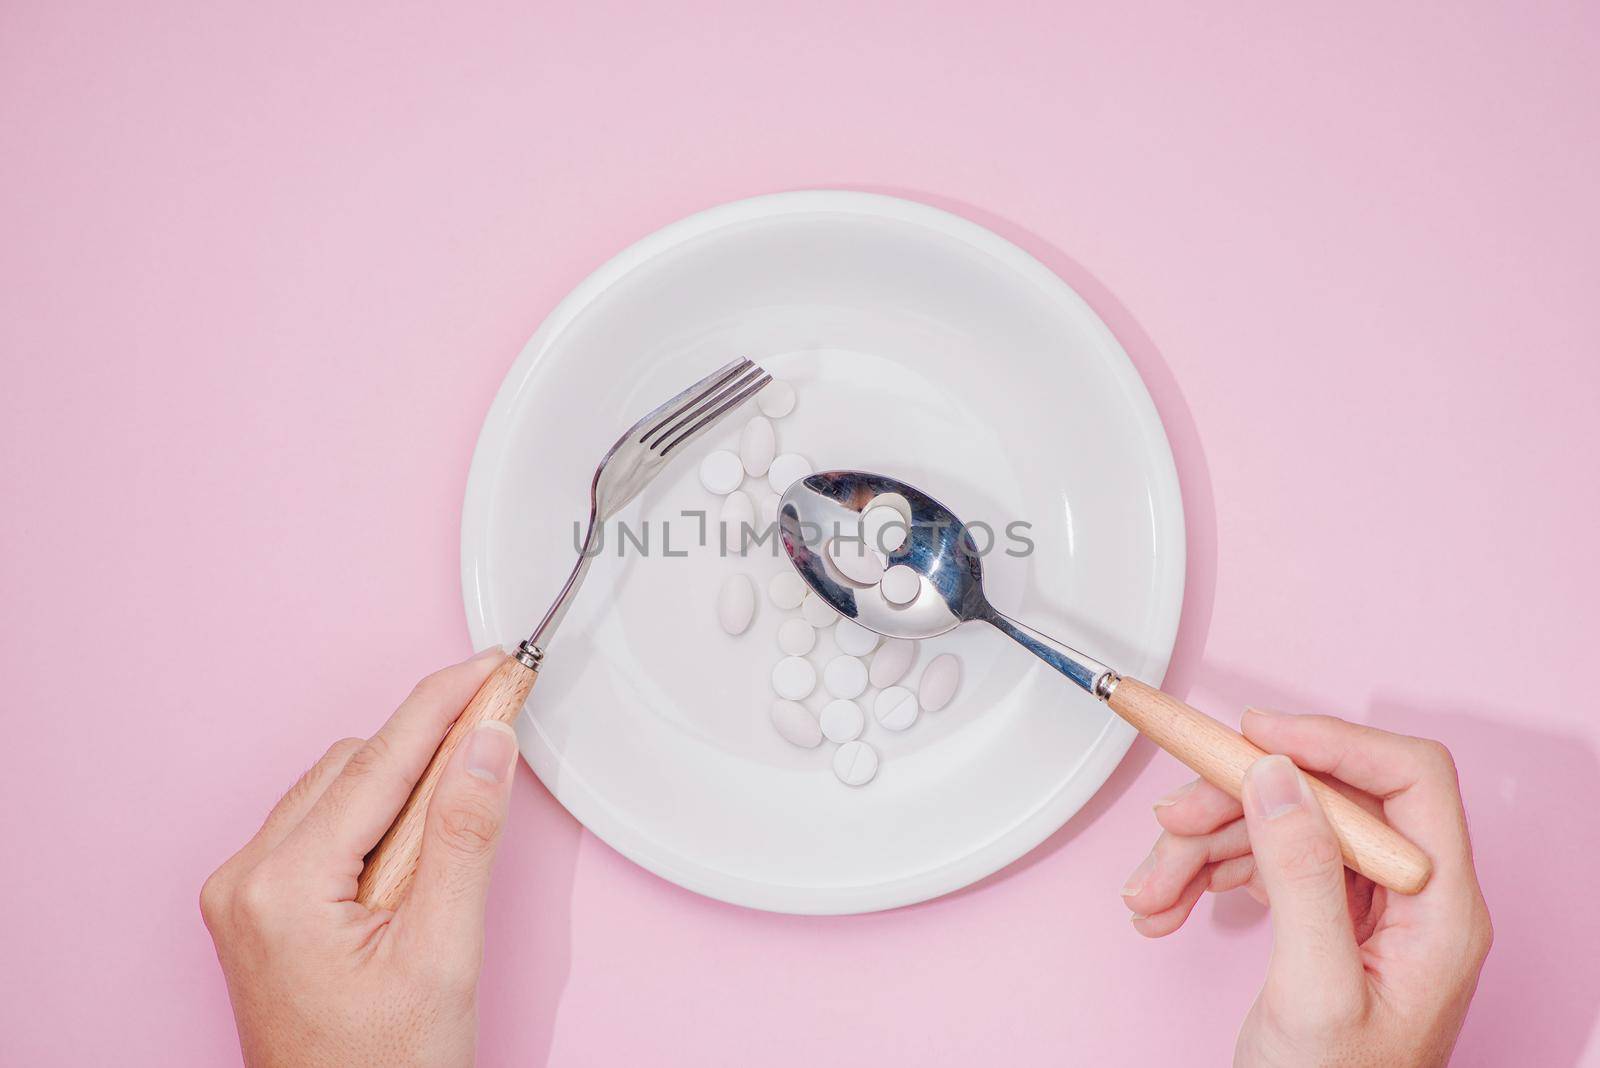 Top view of man's hands at dining table holding a fork and knife above dish with pills over pink background.